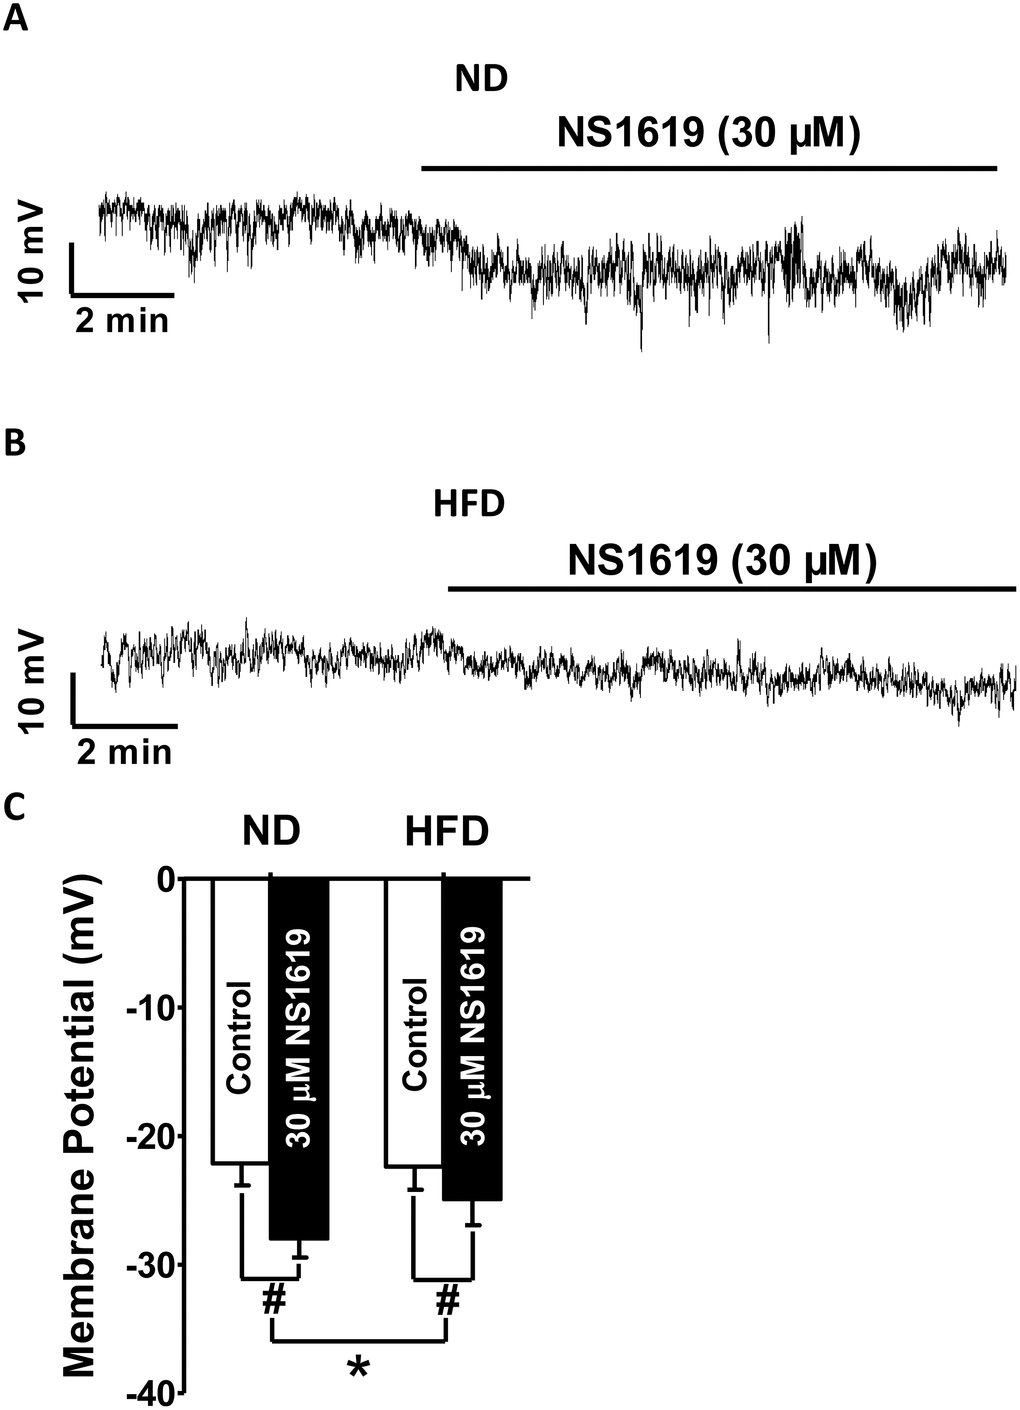 Hyperpolarization of the membrane potential upon pharmacological activation of BK channels is attenuated in HFD DSM cells. Representative recordings in current-clamp mode illustrating the NS1619 (30 μM)-induced hyperpolarization effect on the membrane potential in ND (A) and HFD (B) DSM cells. (C) Summary data indicating a significantly attenuated hyperpolarization effect on the membrane potential in HFD DSM cells compared with ND DSM cells. Data are expressed as the mean ± SEM; n = 8, N = 6 per group; * P NS: not significant.